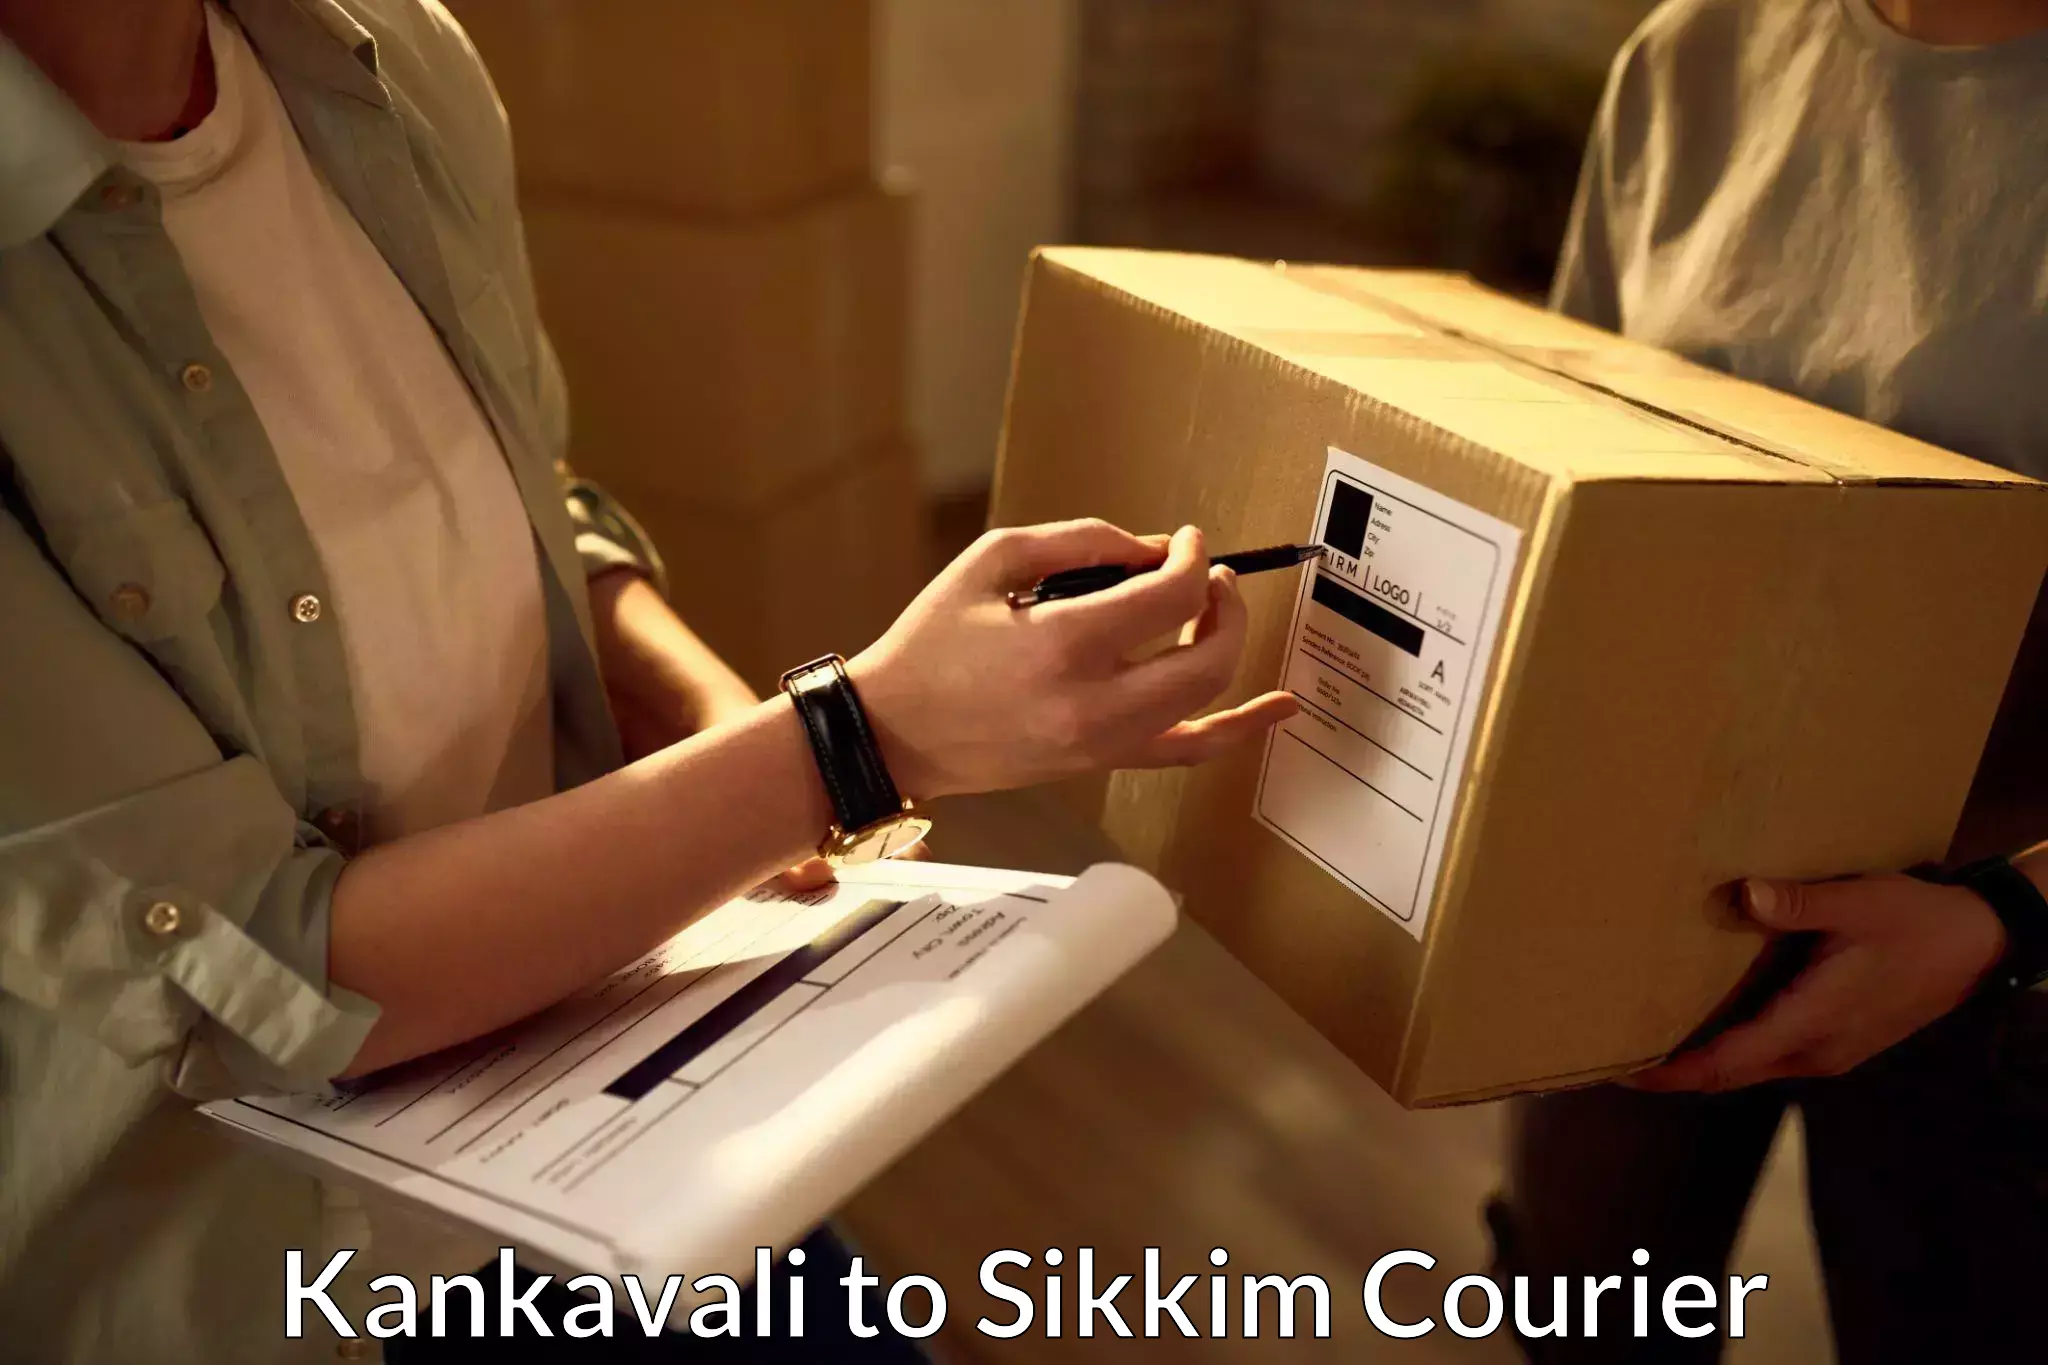 On-call courier service Kankavali to Pelling